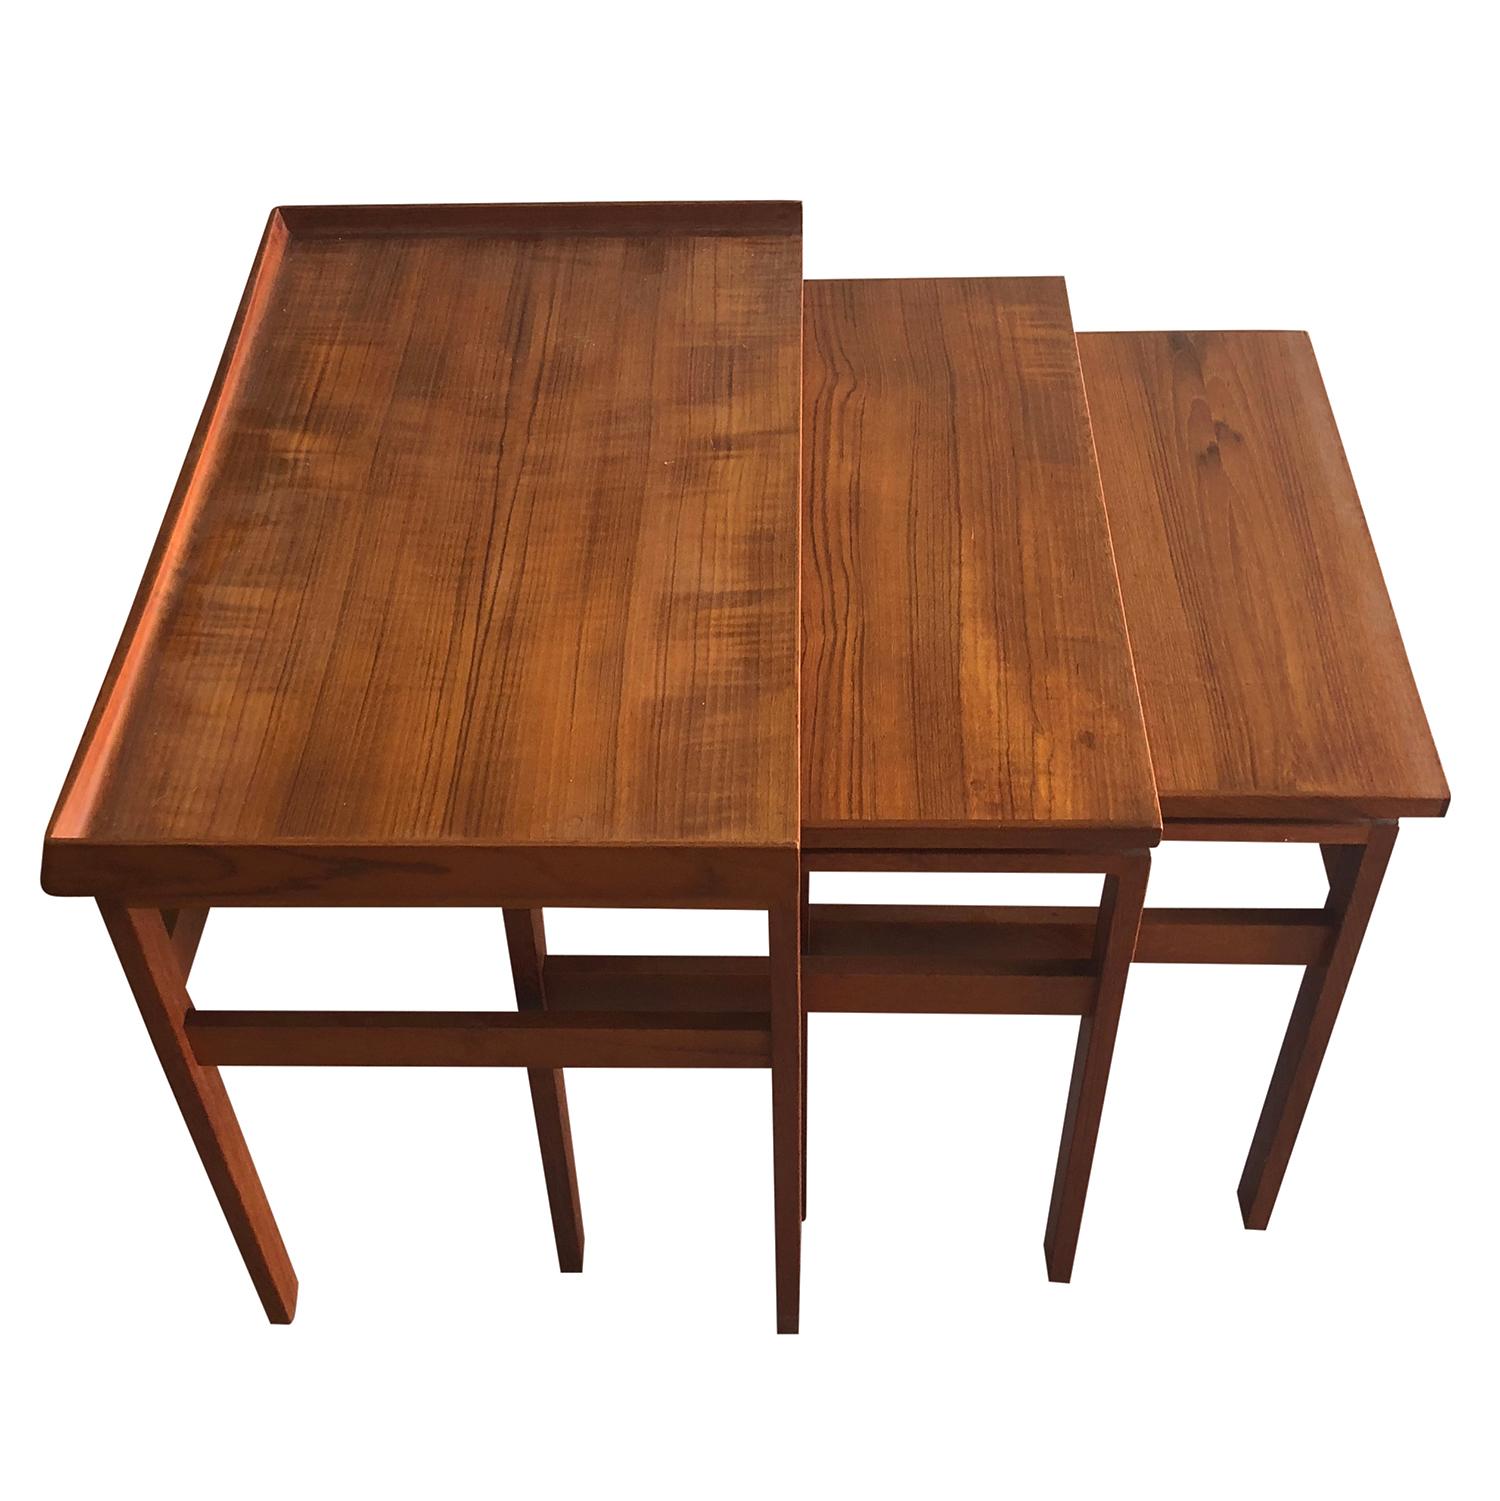 A vintage Mid-Century Modern Danish nest of three side tables made of hand carved teak wood, in good condition. These nest tables with unusual high edges were designed between 1956 and 1960, Denmark. Wear consistent with age and use.

Measures: